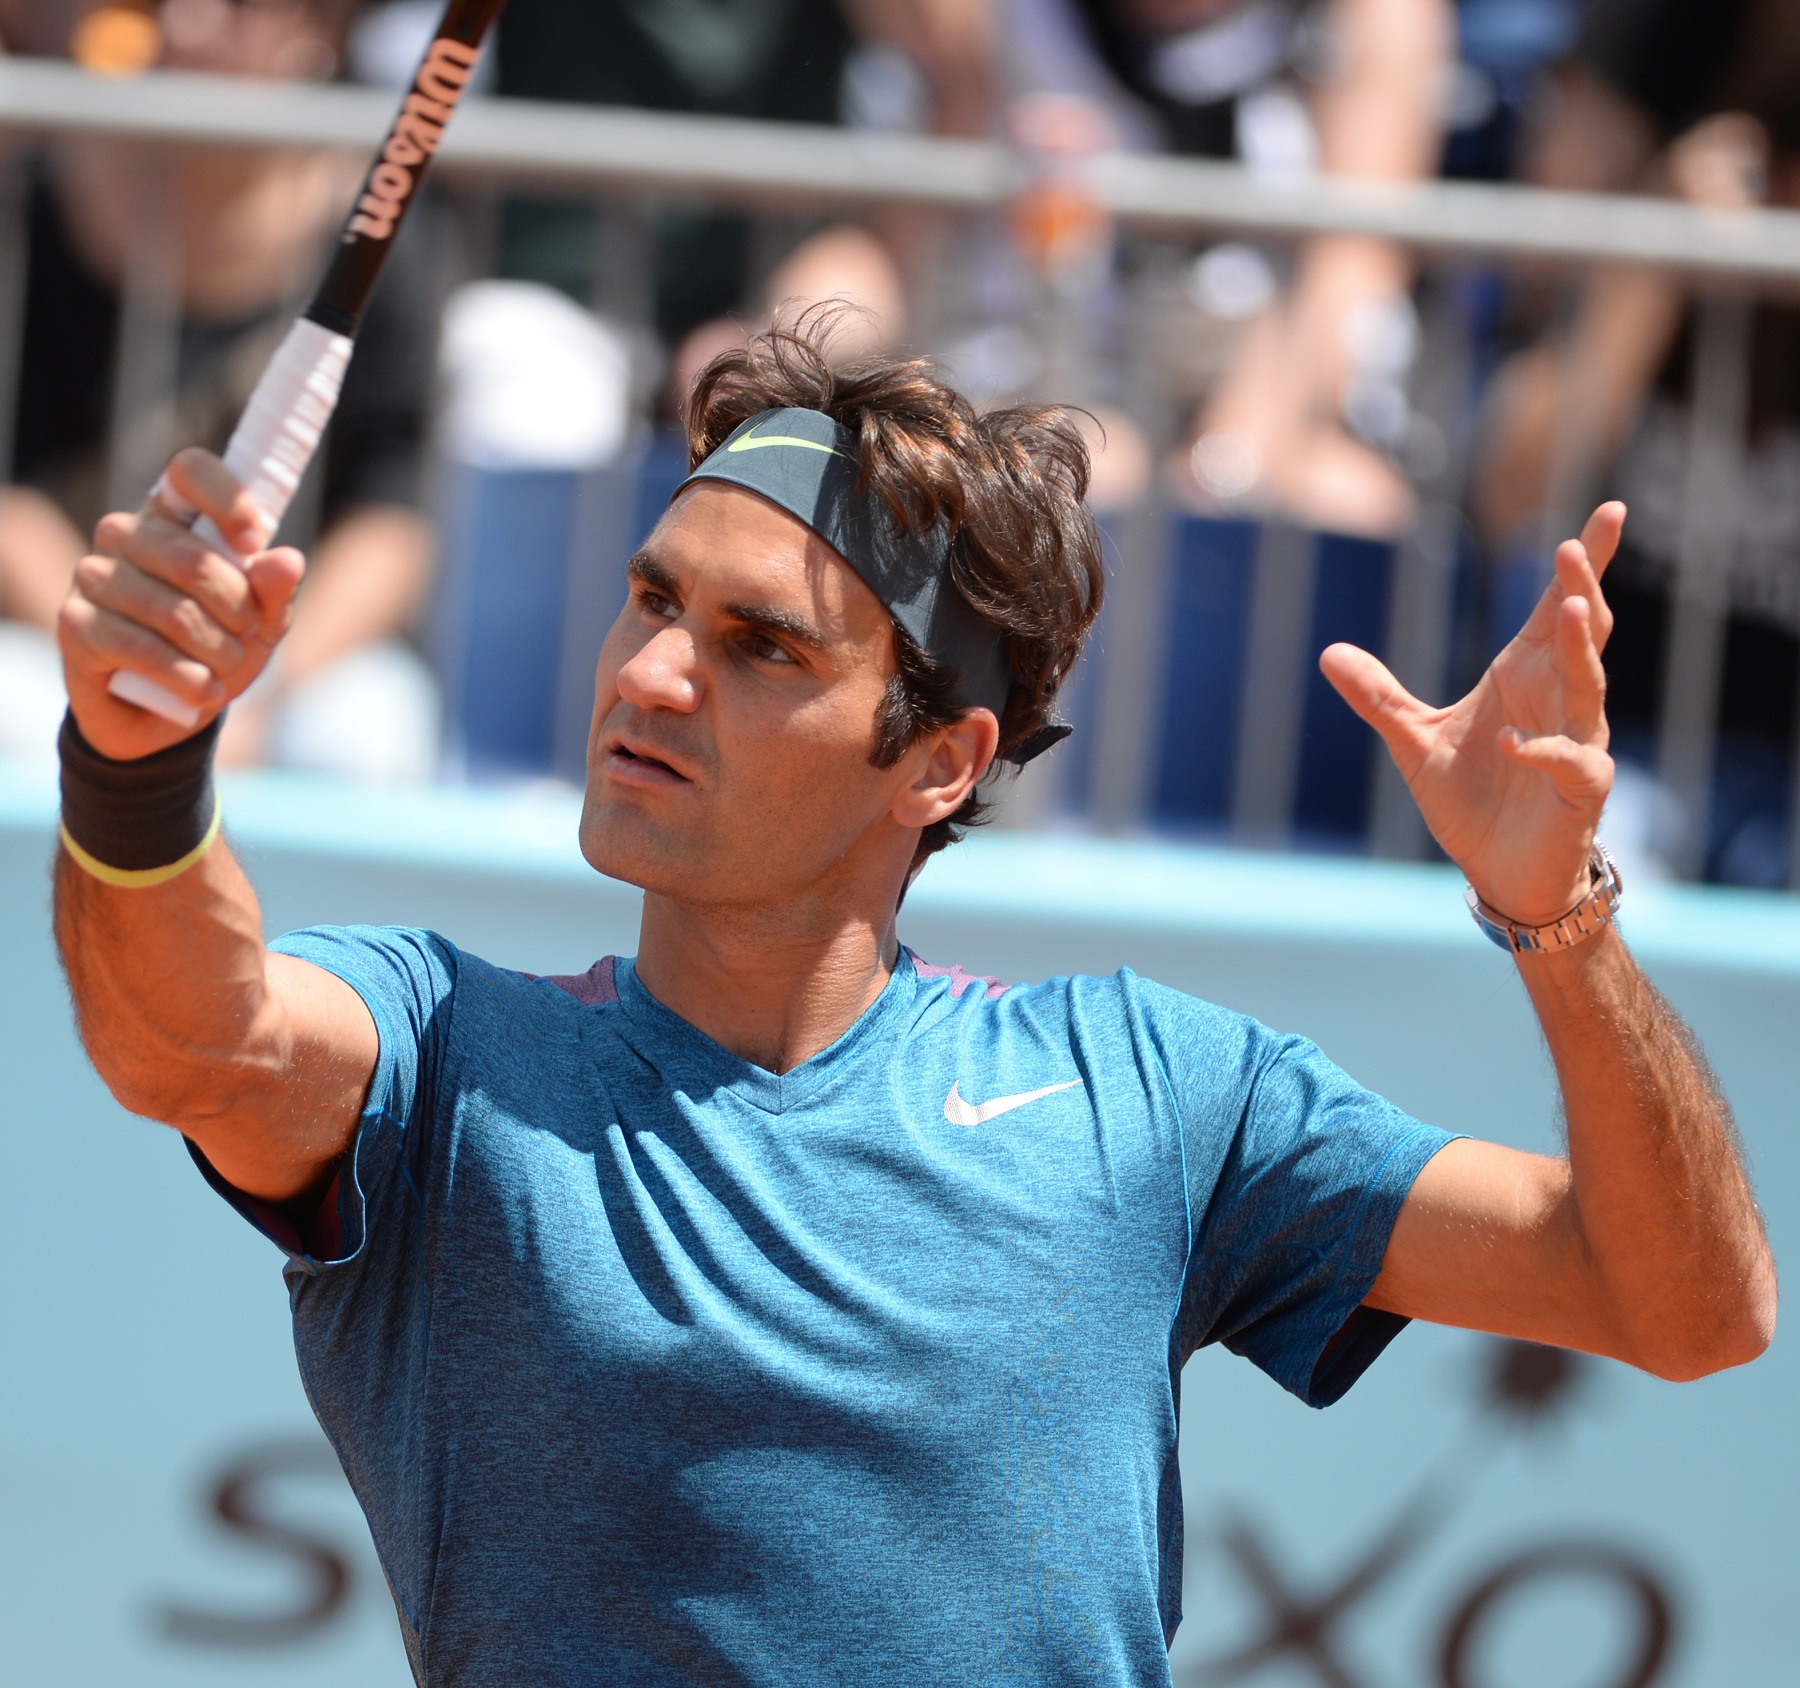 Roland Garros-bound Federer limps out of Italian Open